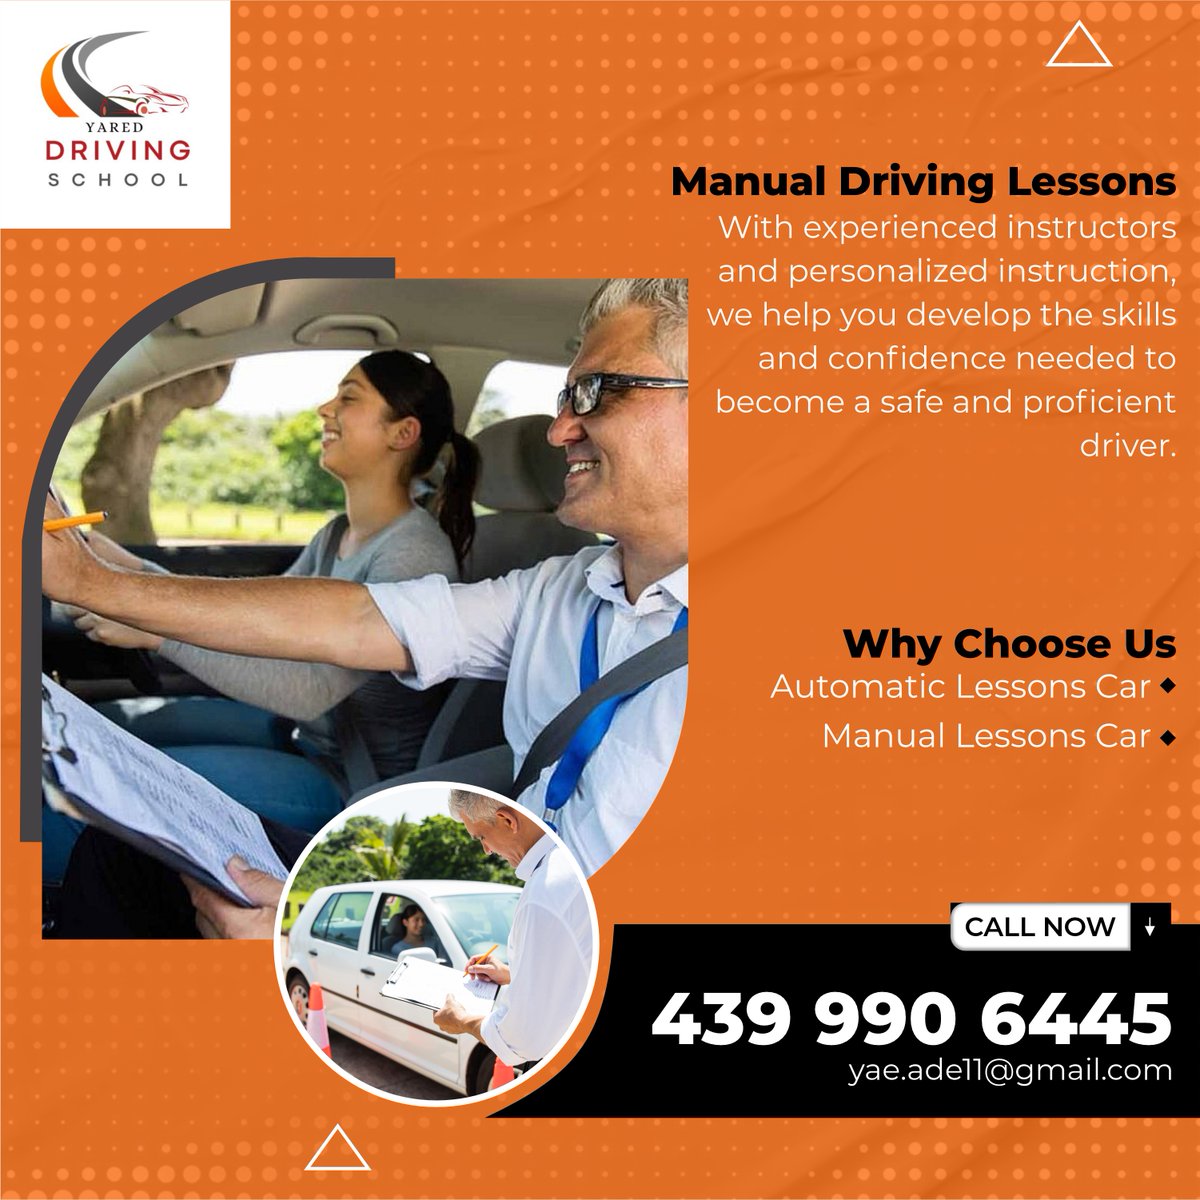 Yared Driving School offers comprehensive manual driving lessons in Ontario, Canada. Gain confidence and proficiency behind the wheel with our expert instruction.

#ManualDrivingLessons 
#LearnToDrive 
#DrivingSchool 
#StickShift 
#ManualTransmission